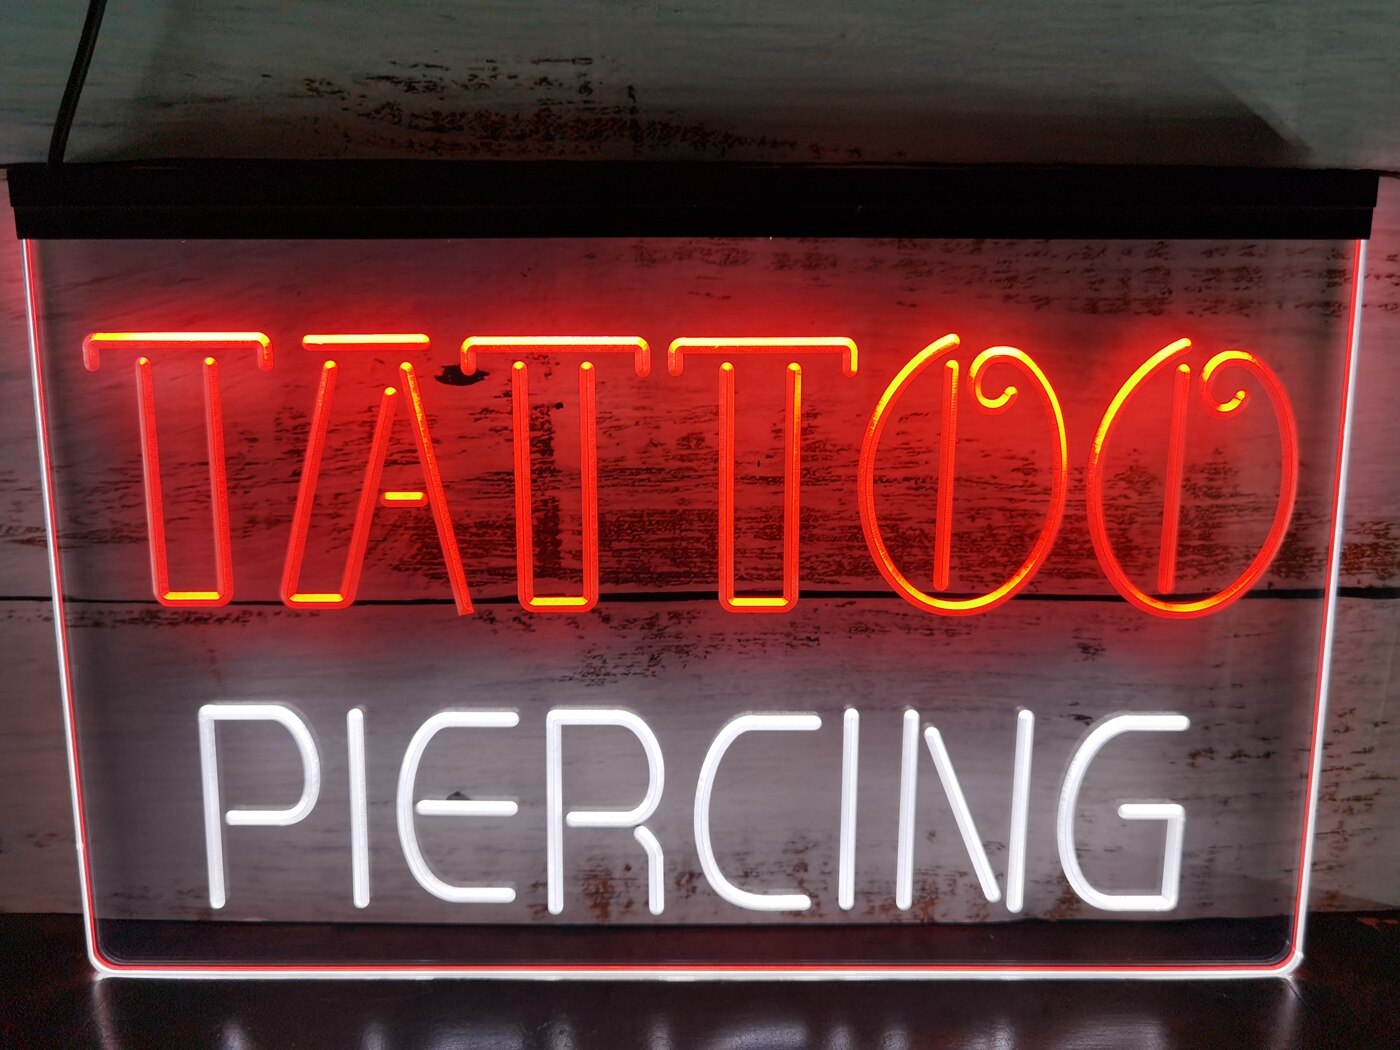 Tattoo  Piercing LED Neon Light Signs  Way Up Gifts